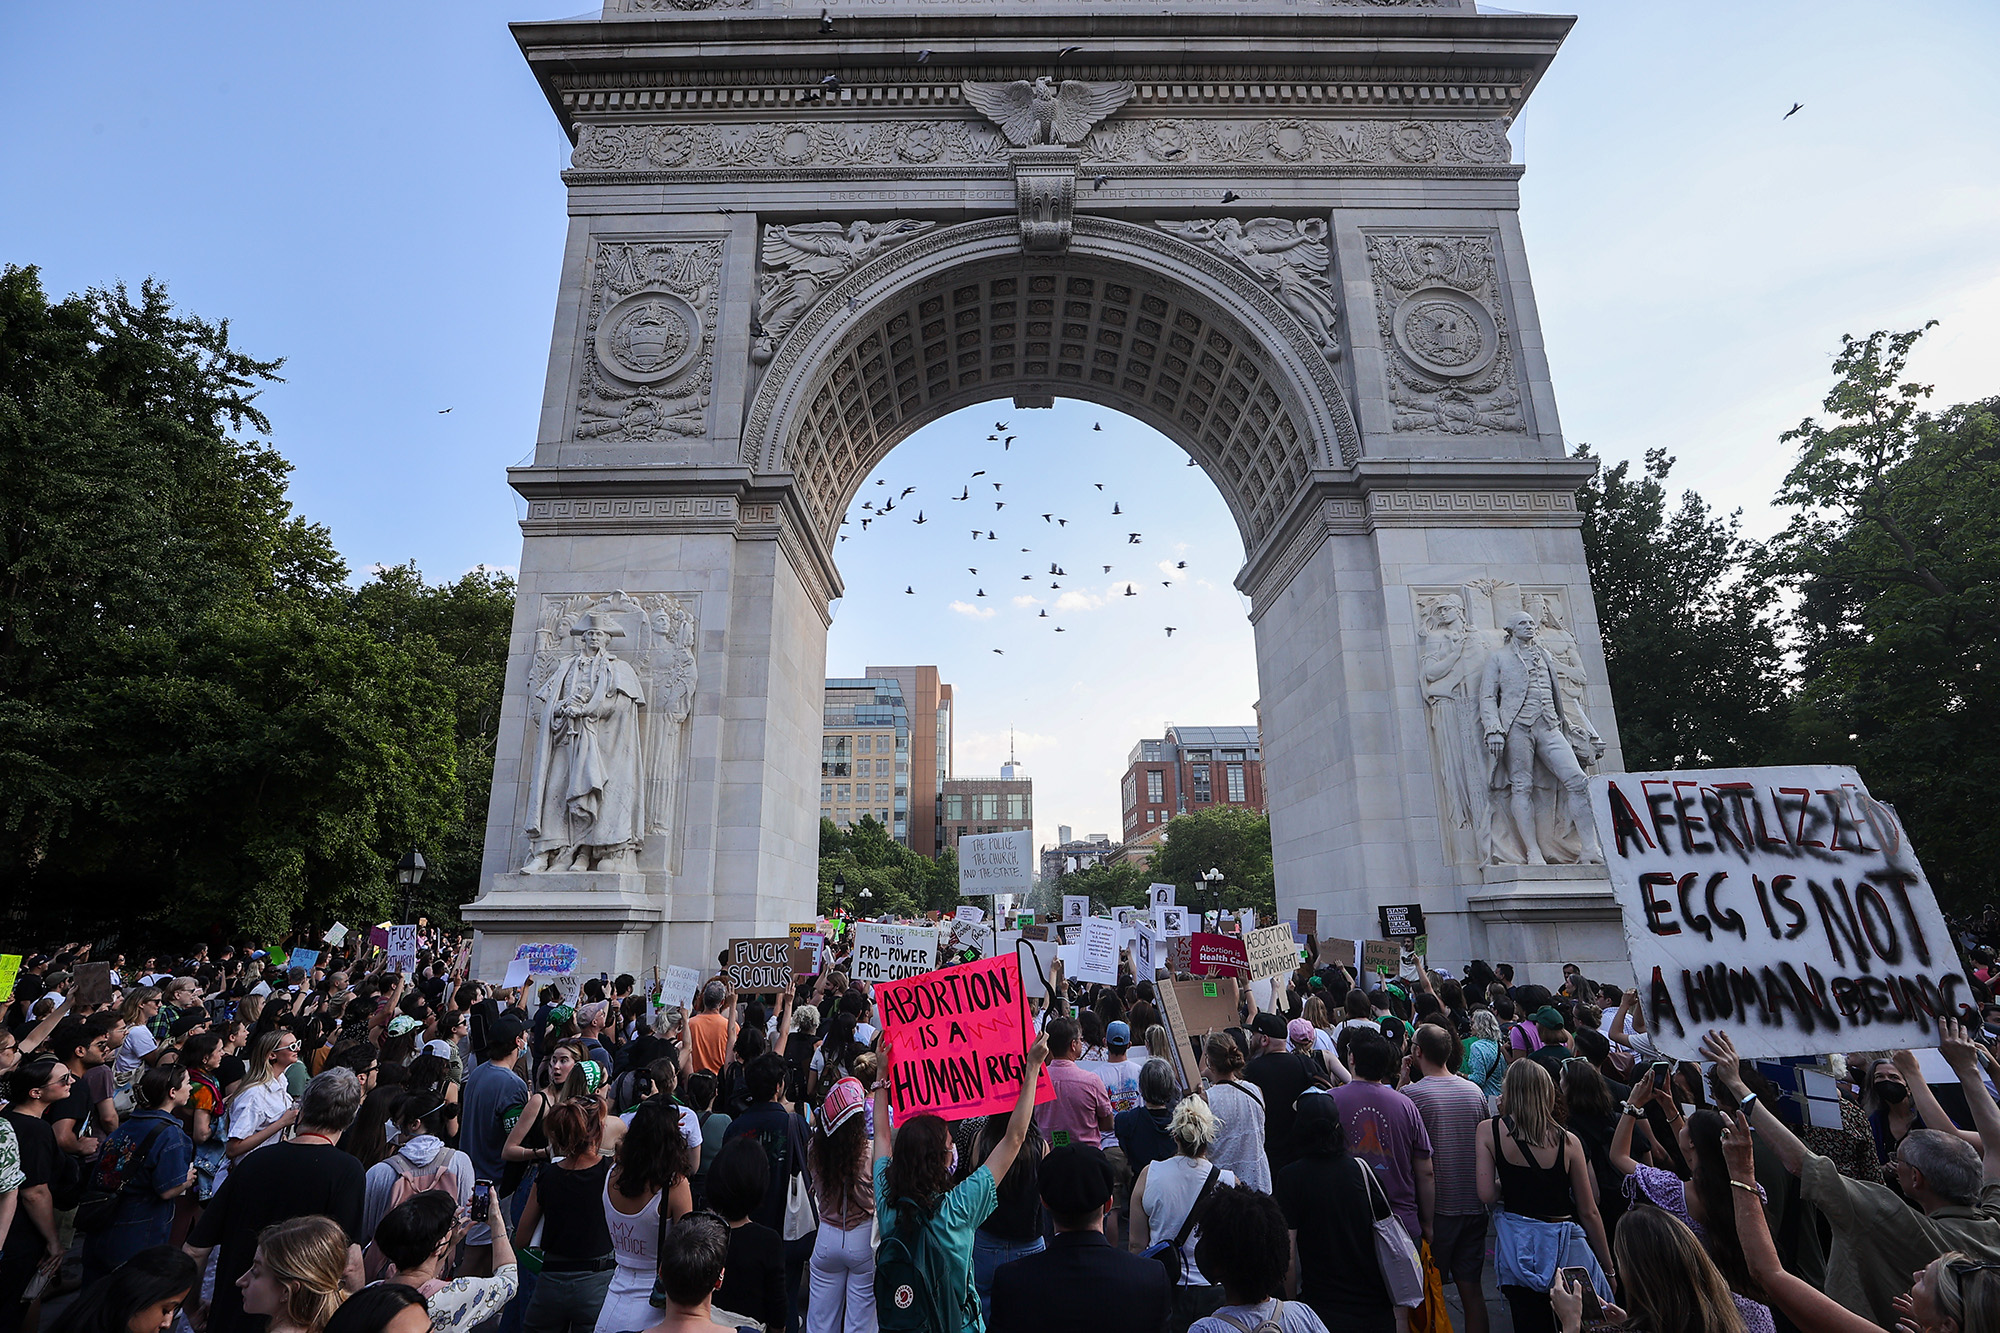 Thousands are gathered at the Washington Square Park in New York City to protest against the Supreme Court's decision on June 24.